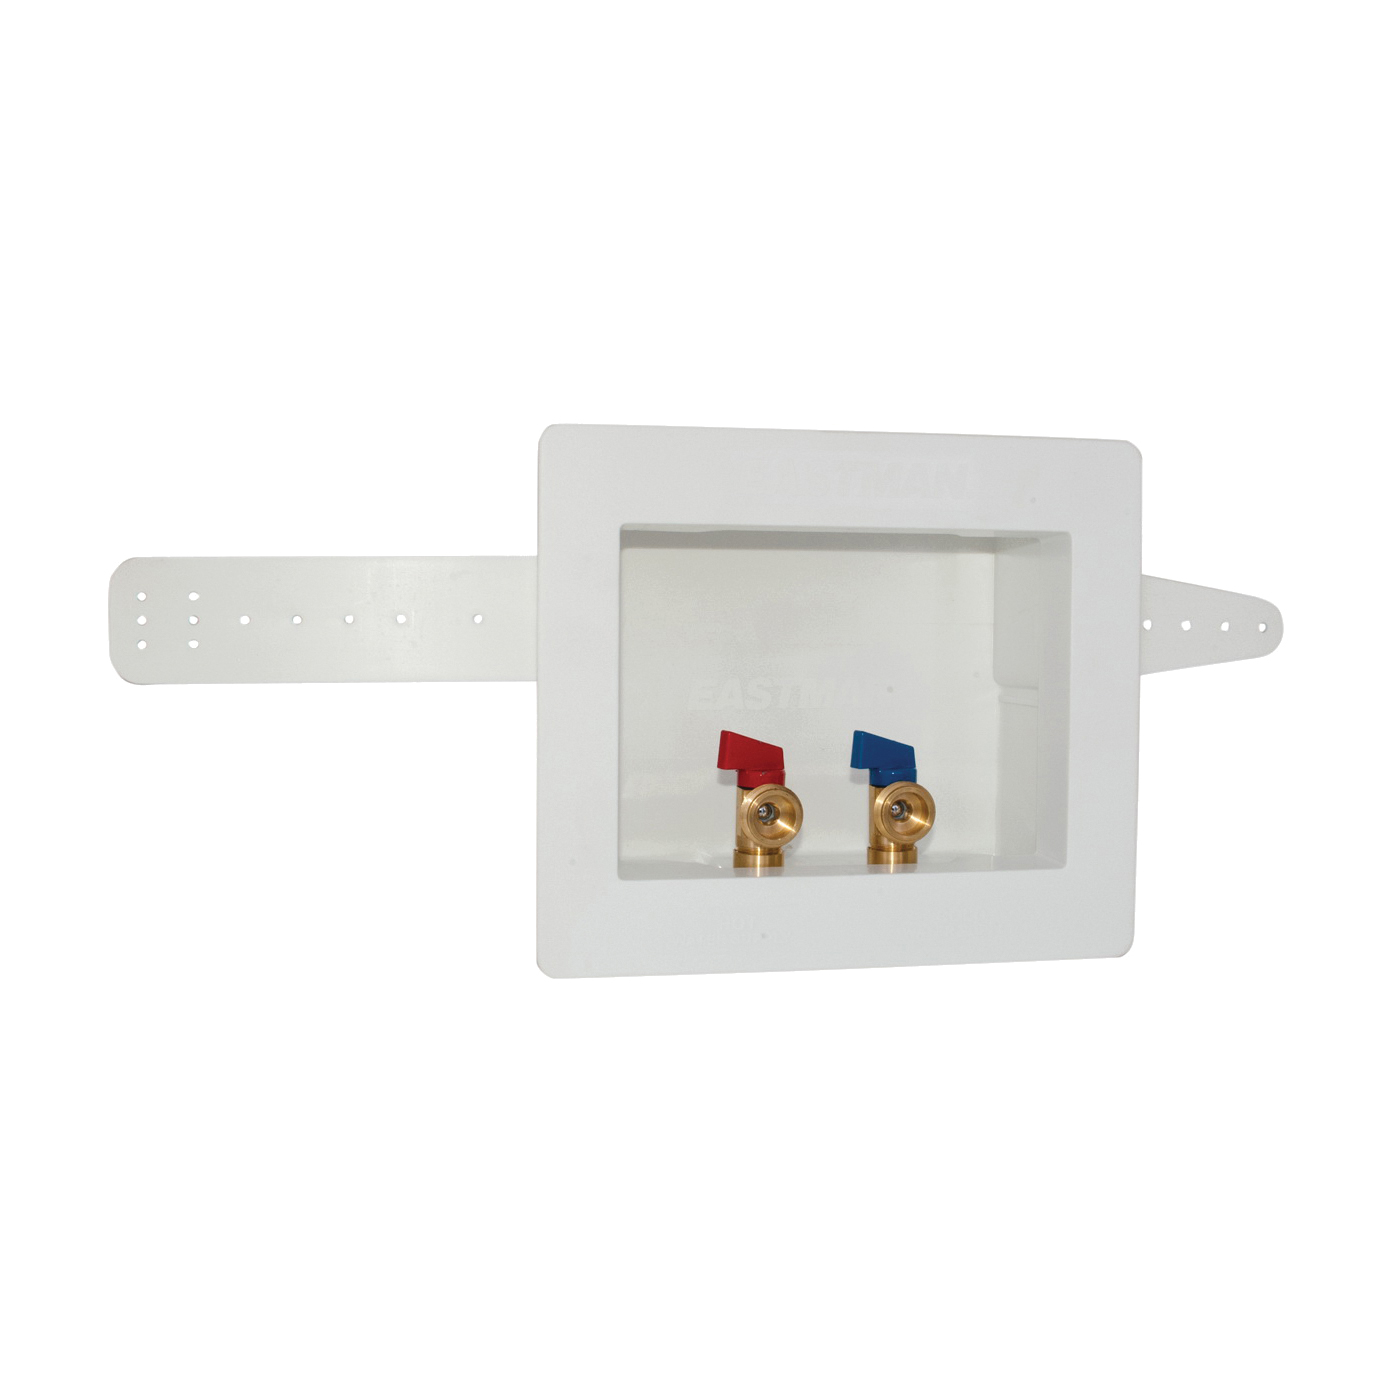 60244/38937 Washing Machine Outlet Box with Valve, 1/2, 3/4 in Connection, Brass/Polystyrene